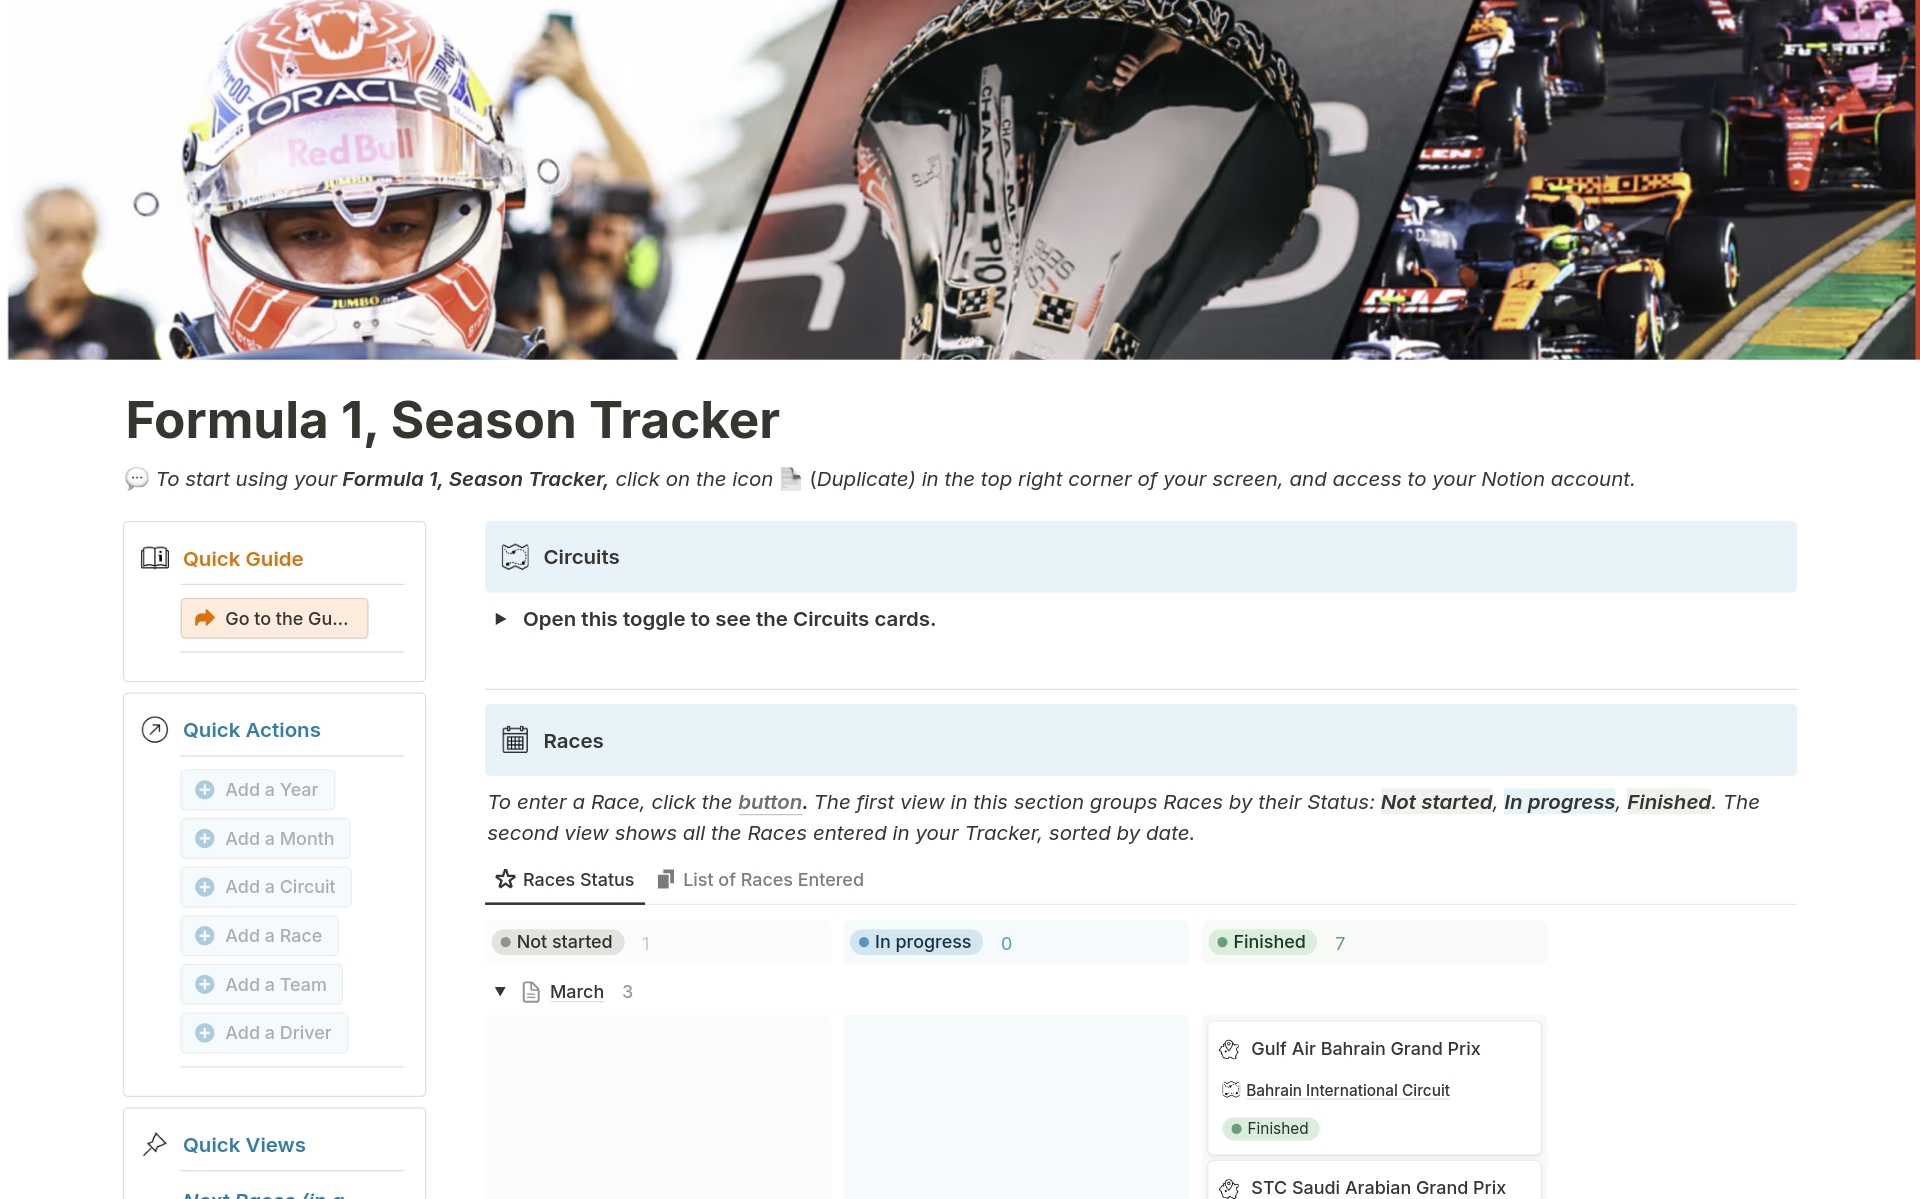 Track the formula 1 races with this template made for Notion!

Add Drivers, Teams, Races and Circuits, follow the action of each race. Write down the results and see how the statistics are updated and showed in your dashboards.
